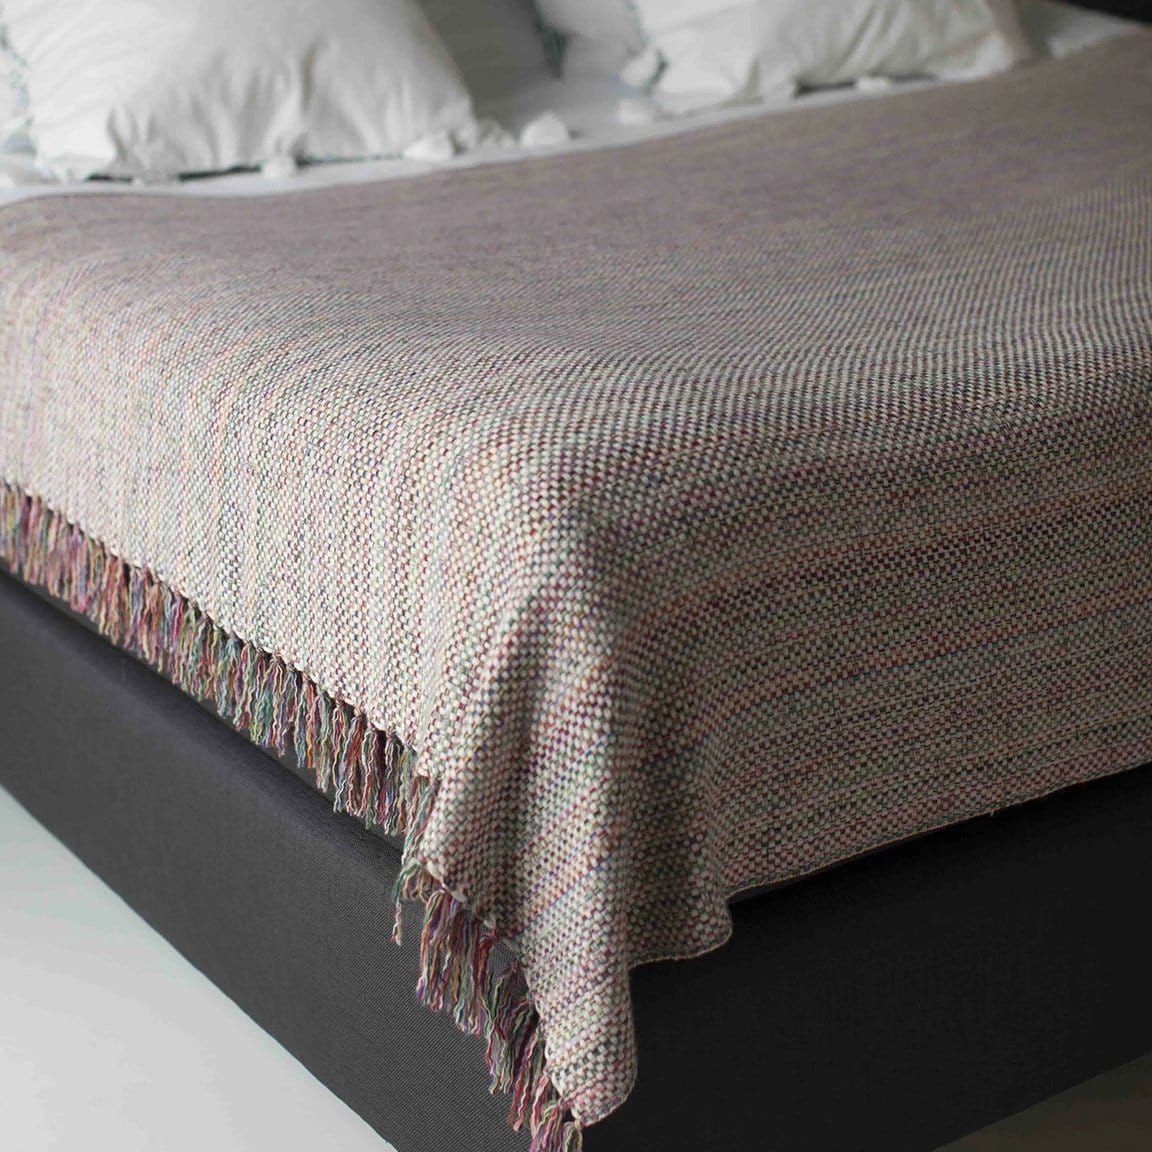 Italian made cashmere throw in multicolour, draped over a dark grey bed with the throws tassels visible on the left side